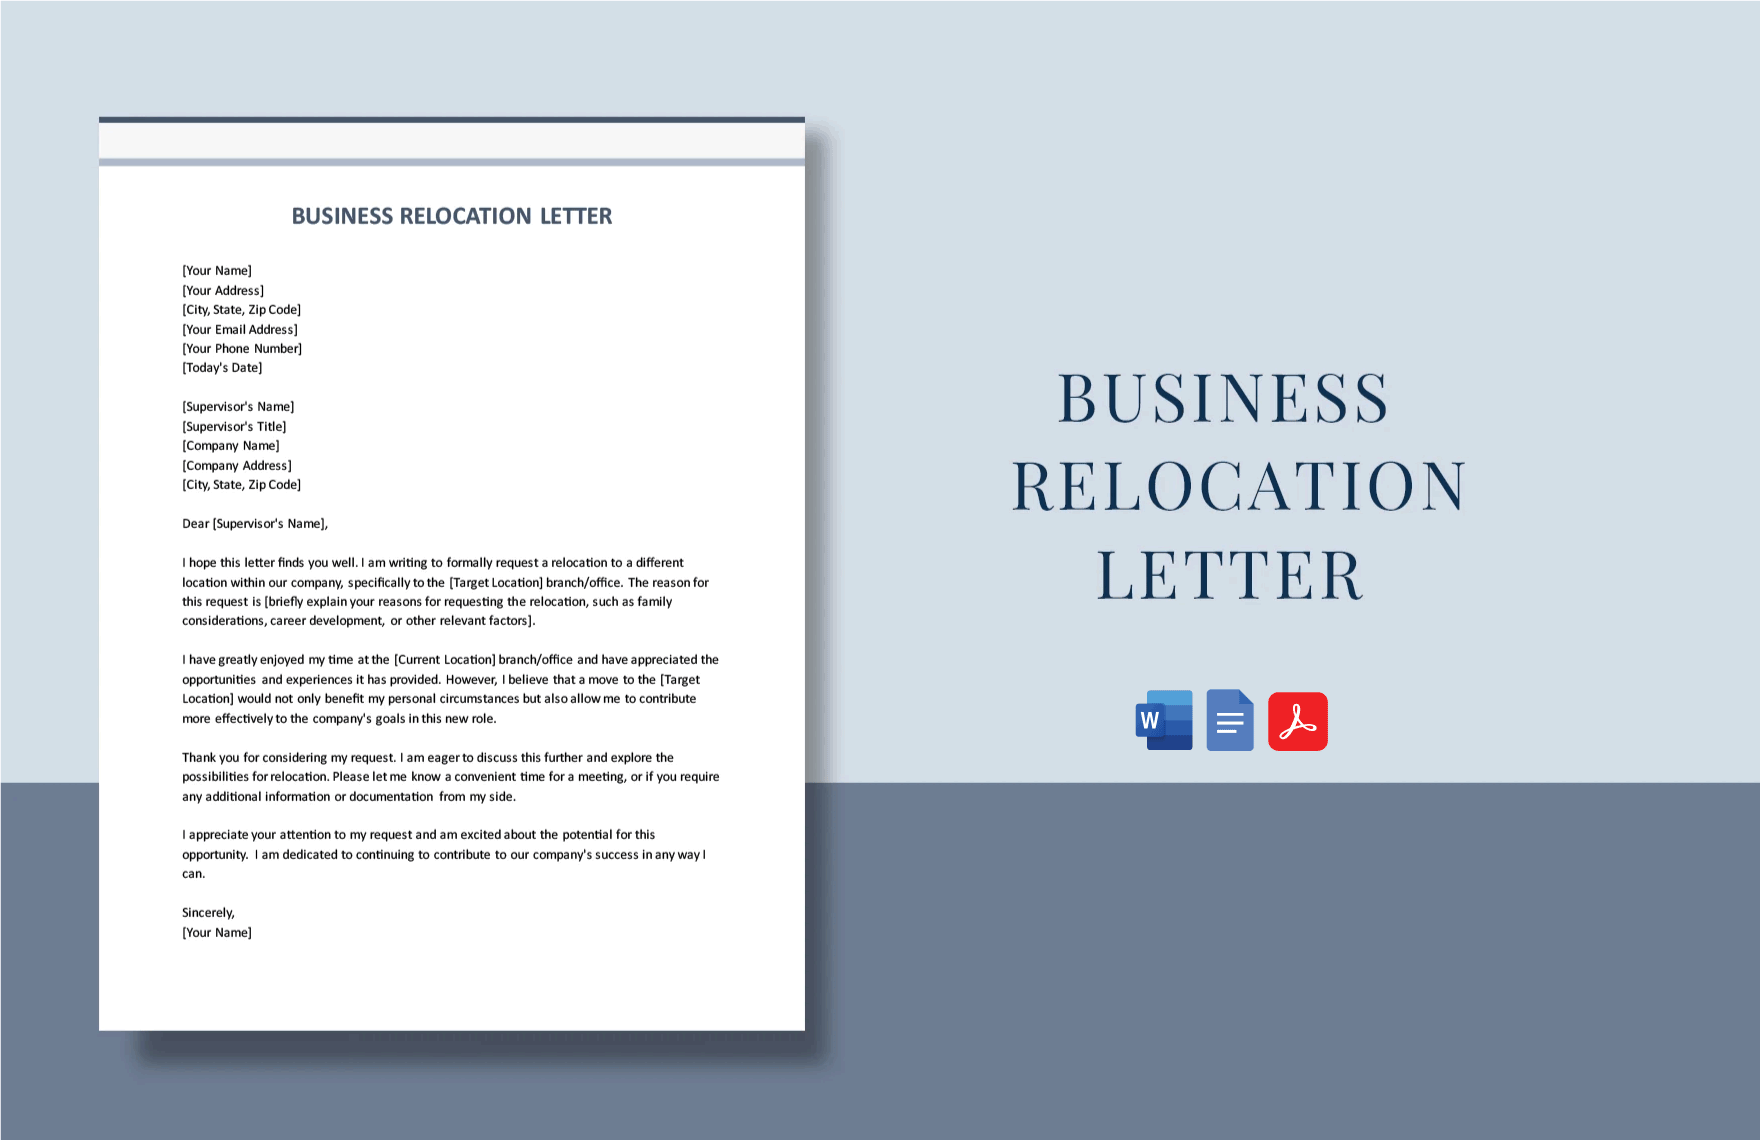 Business Relocation Letter in Word, Google Docs, PDF